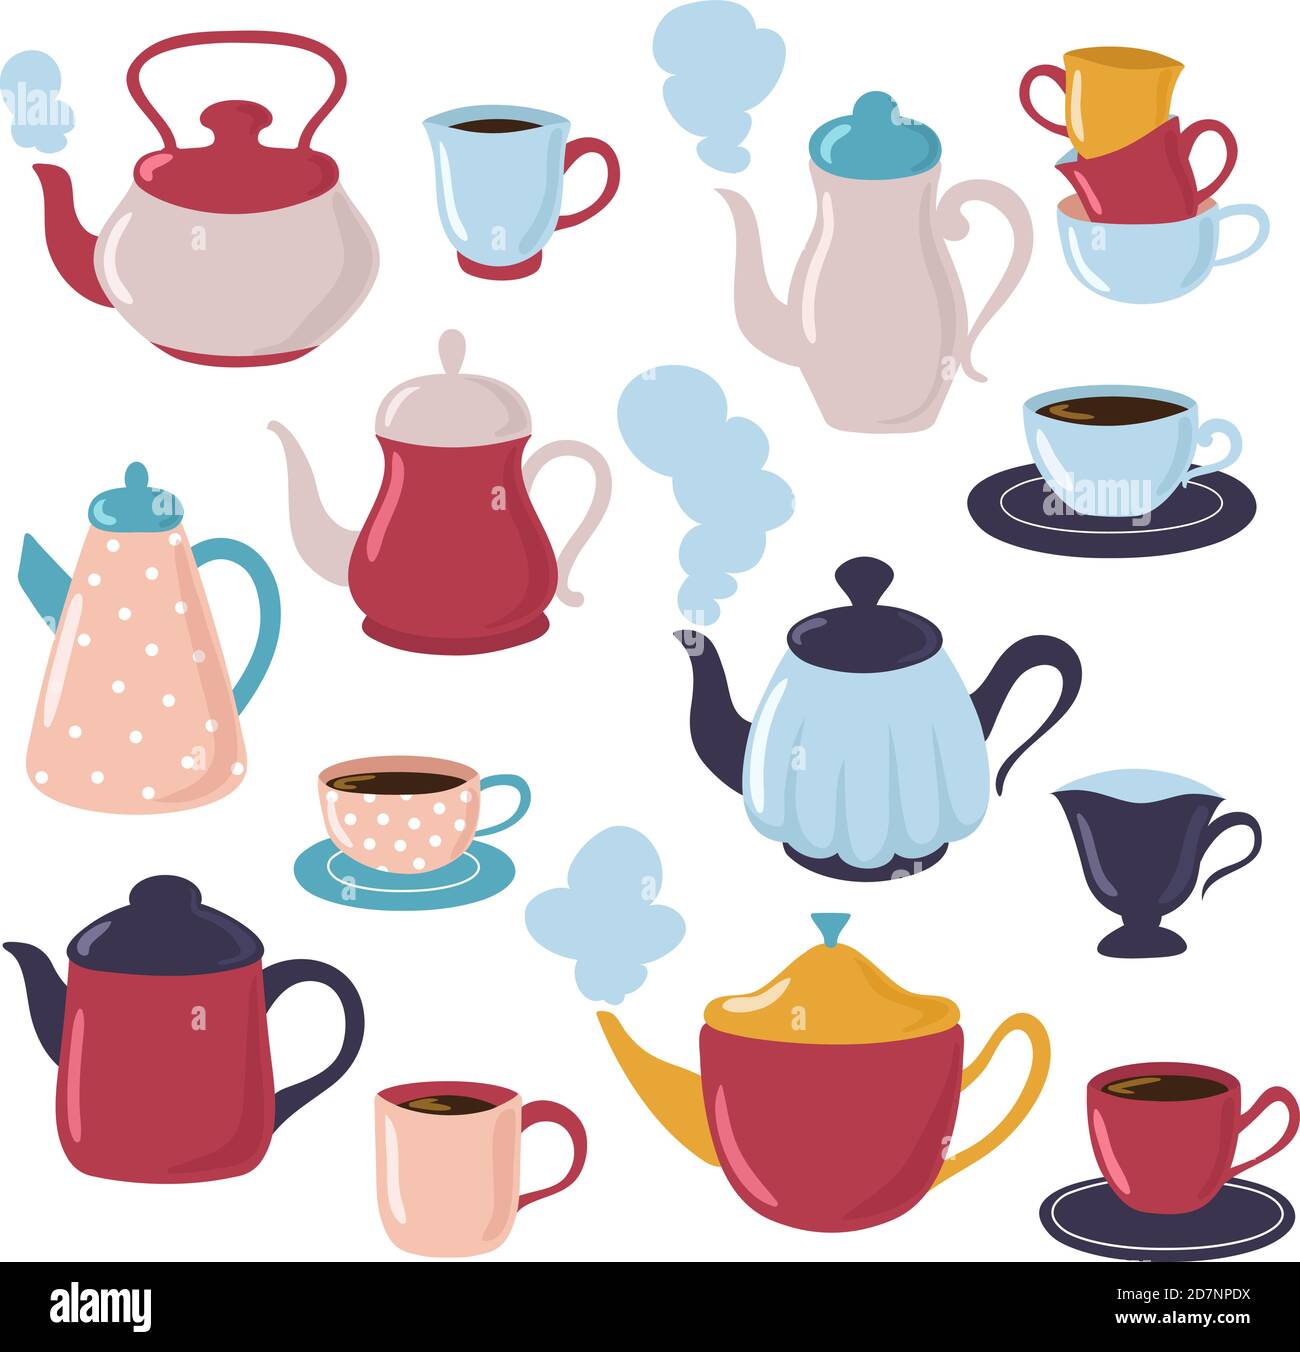 Teapot and cup collection. Cartoon water kettle and porcelain cups with tea. Kitchenware vector set. Teapot of cup, tea drink illustration Stock Vector